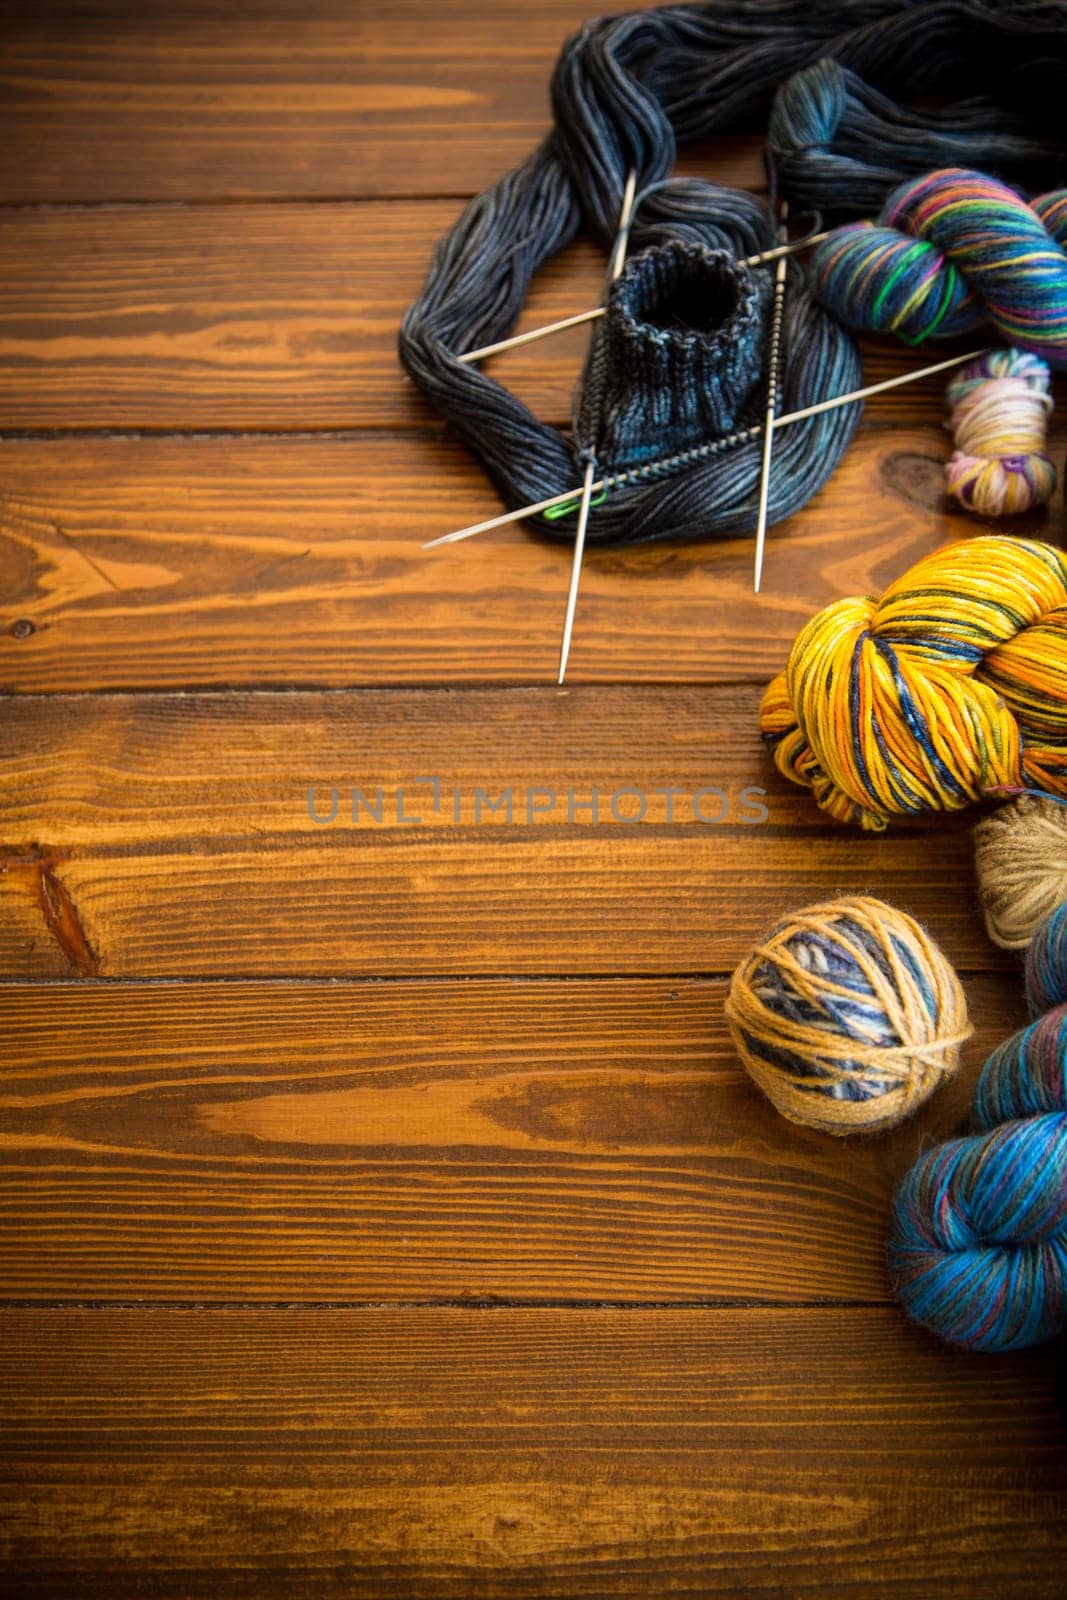 Colored threads, knitting needles and other items for hand knitting by Rawlik